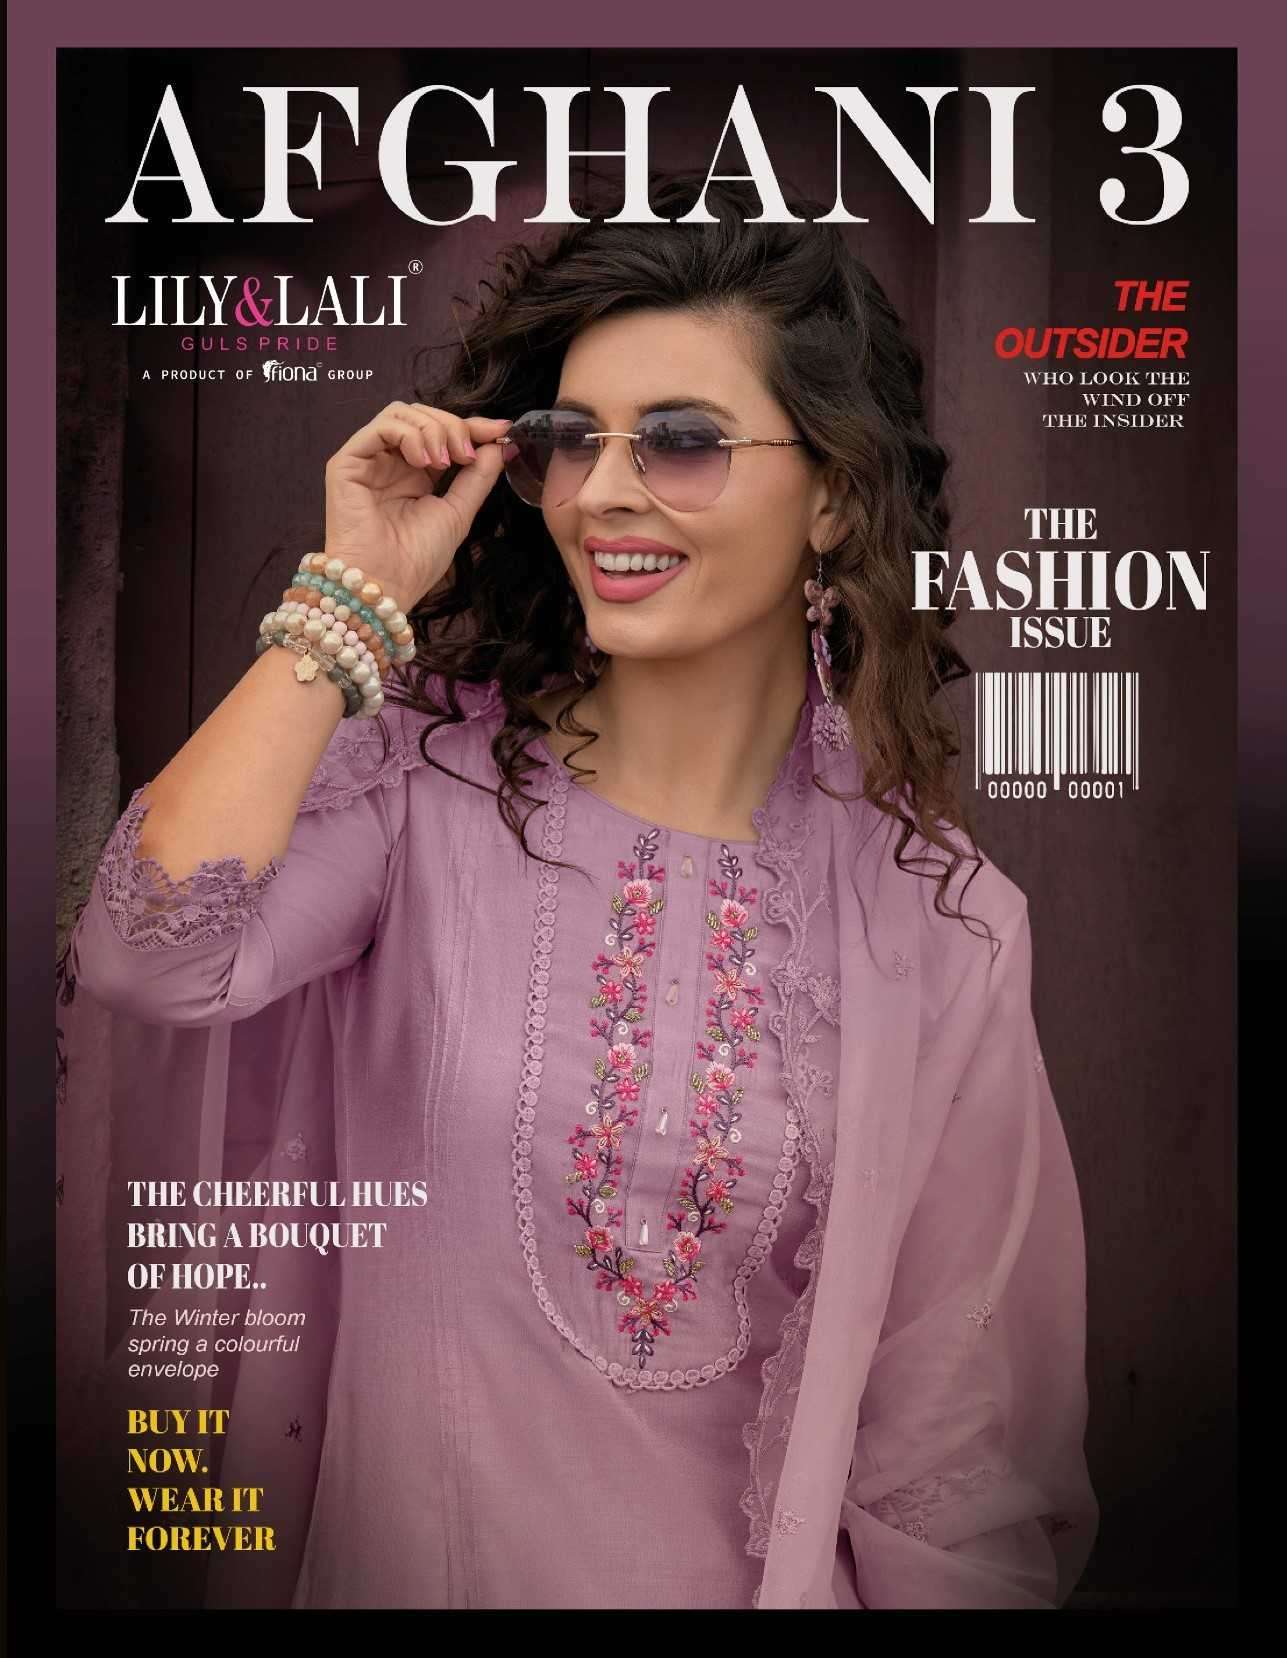 lily and lali afghani vol 3 series 16501-16506 milan silk readymade suit 